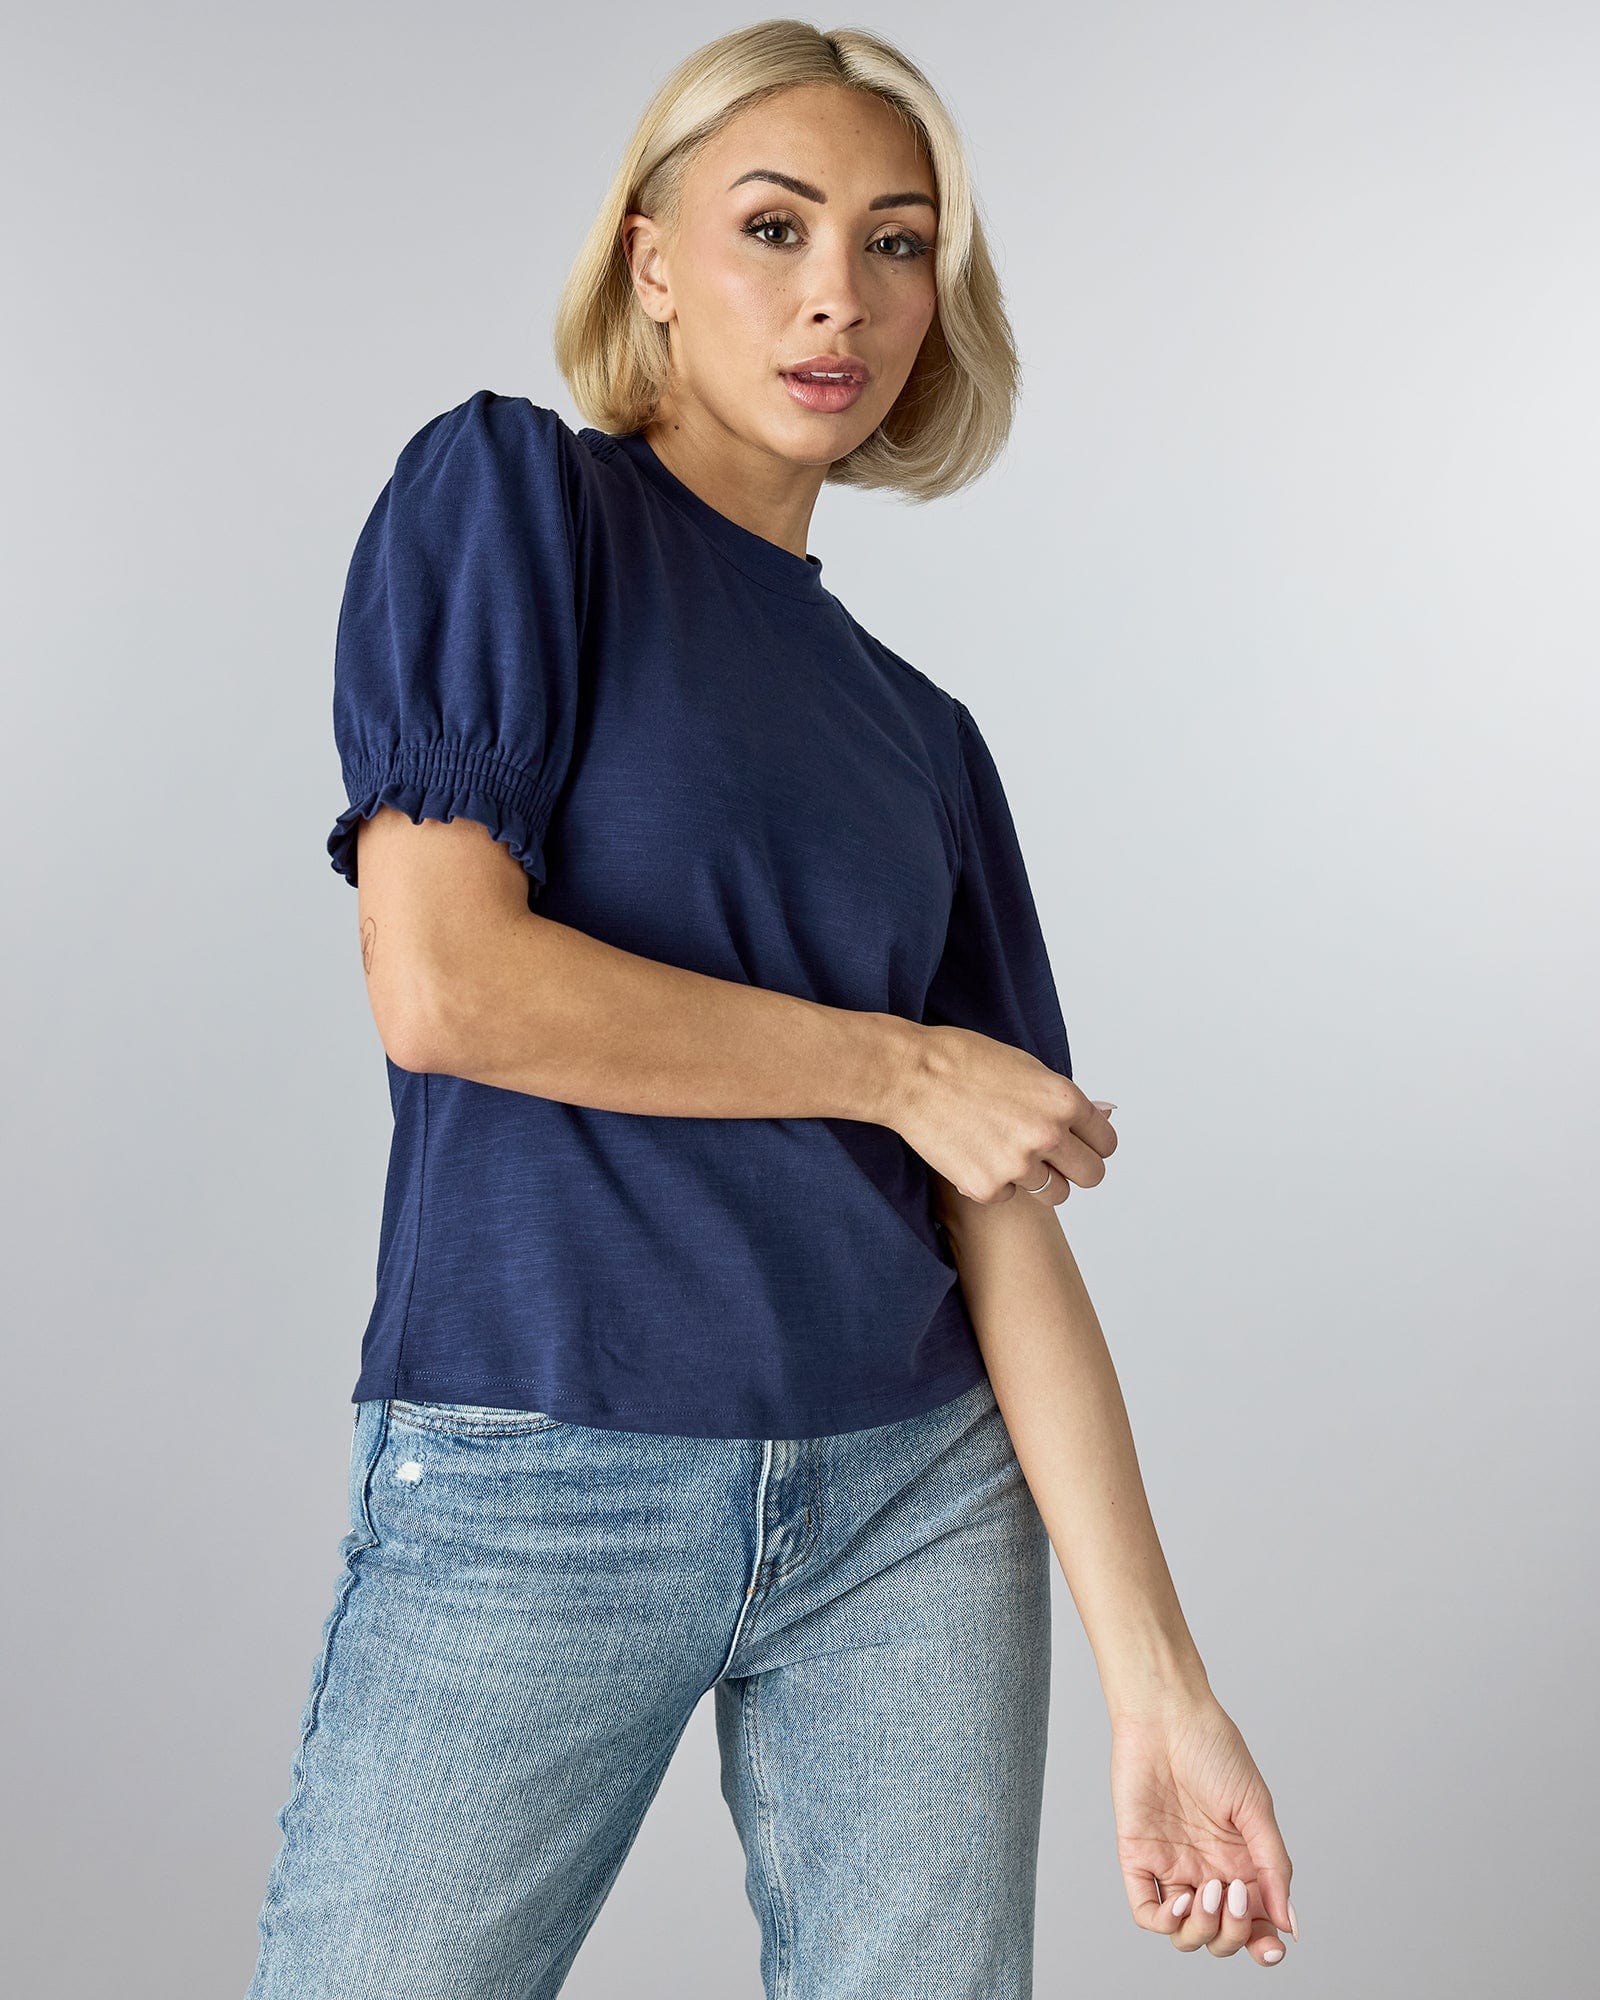 Woman in a blue short sleeved top that has puffed sleeves and a high neckline.